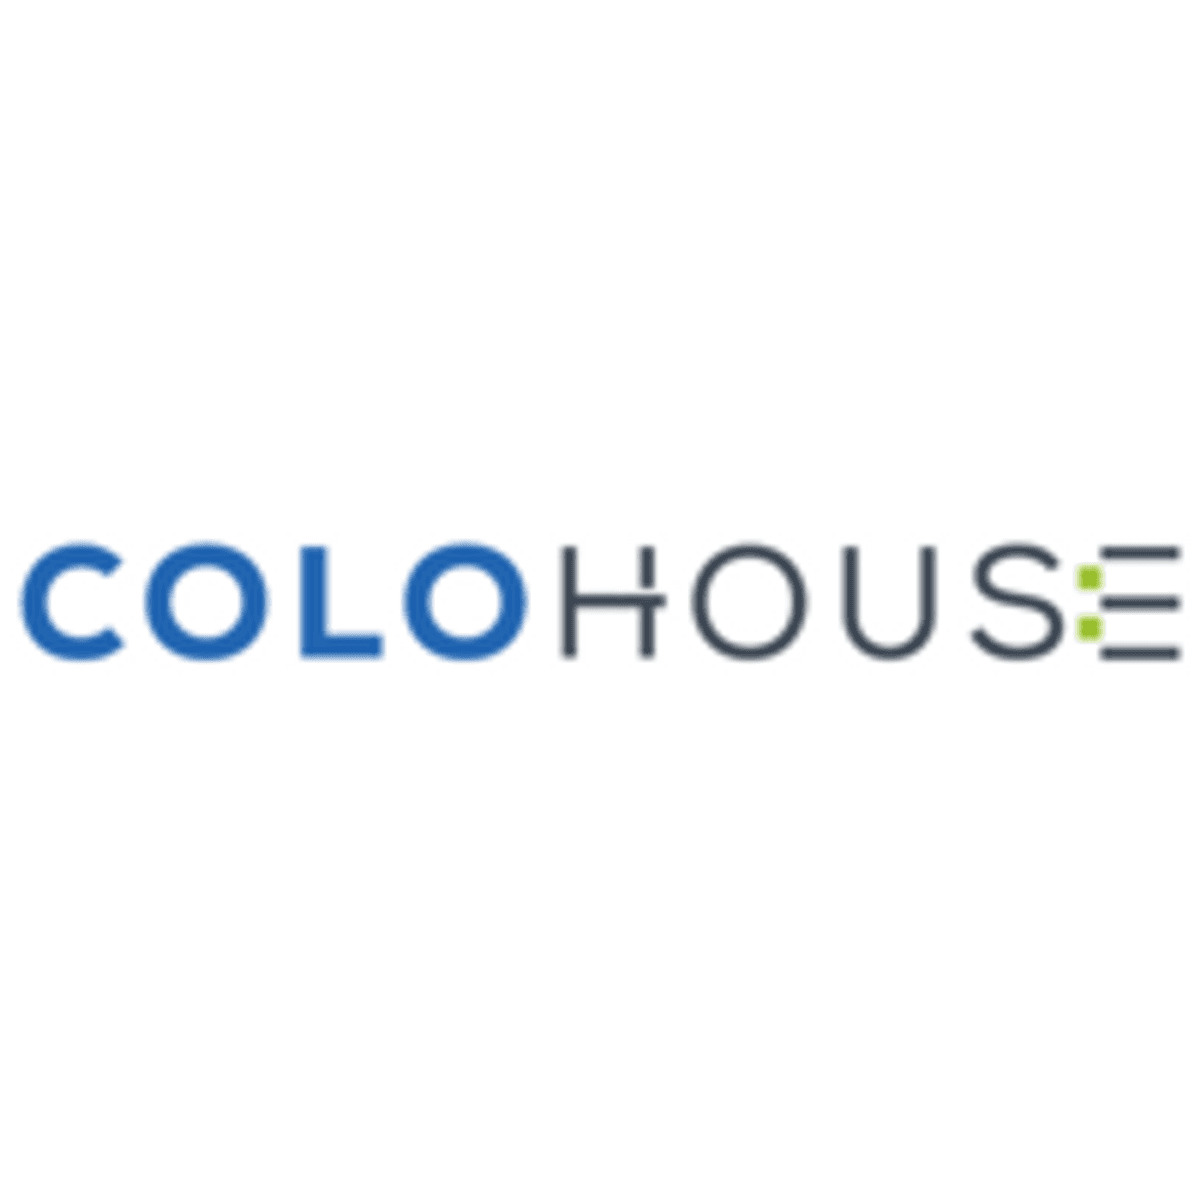 ColoHouse lanceert anti-DDoS oplossing Scrubbing as a Service image